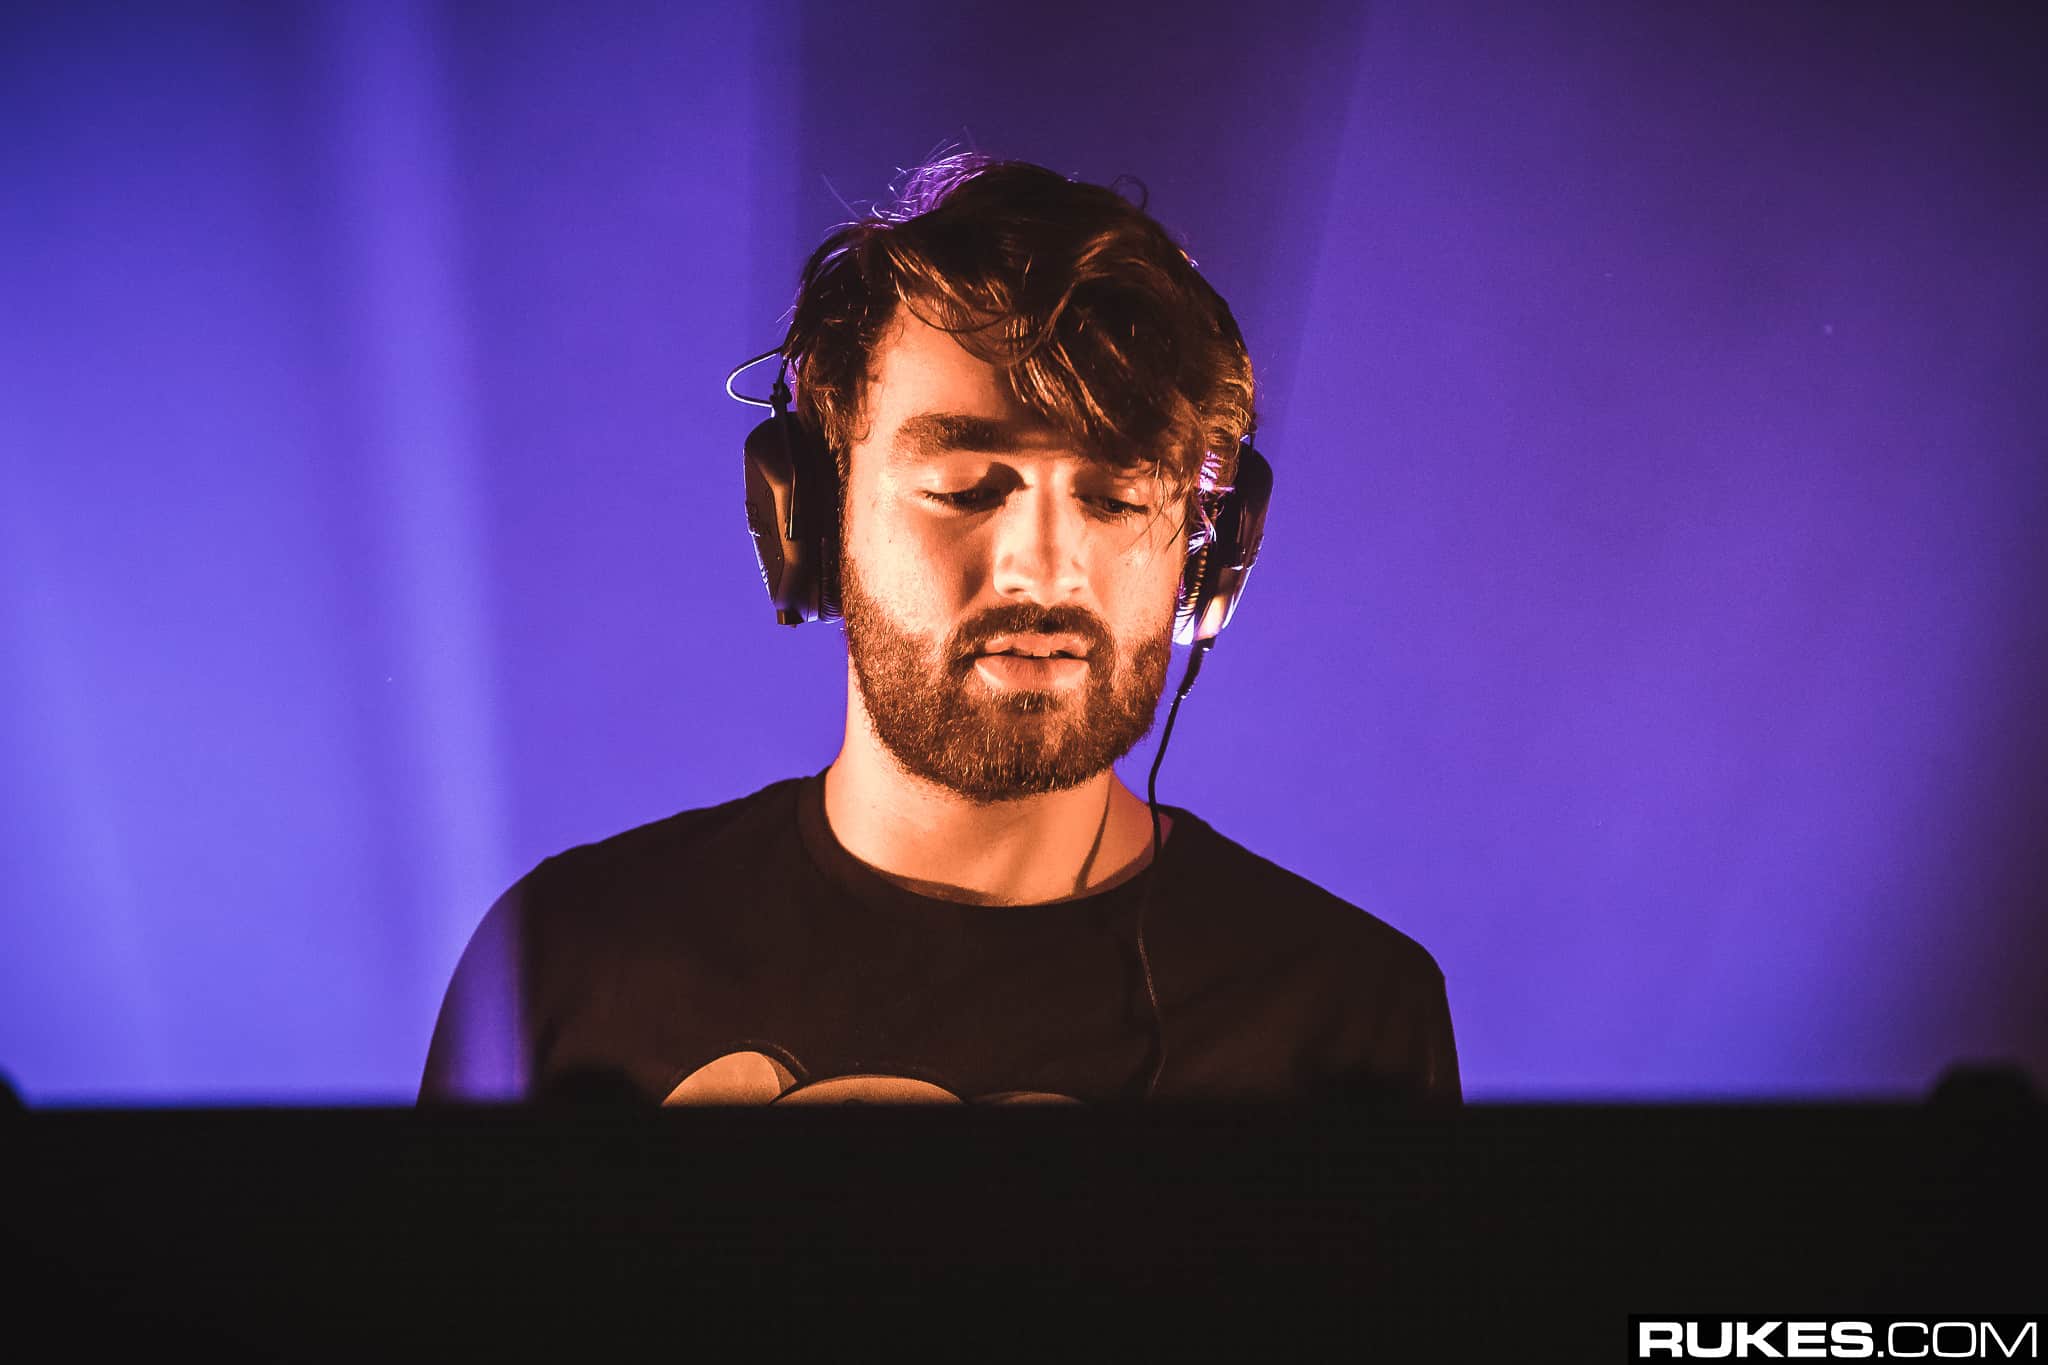 Glass Animals recruit Oliver Heldens & Sonny Fodera on new remix EP